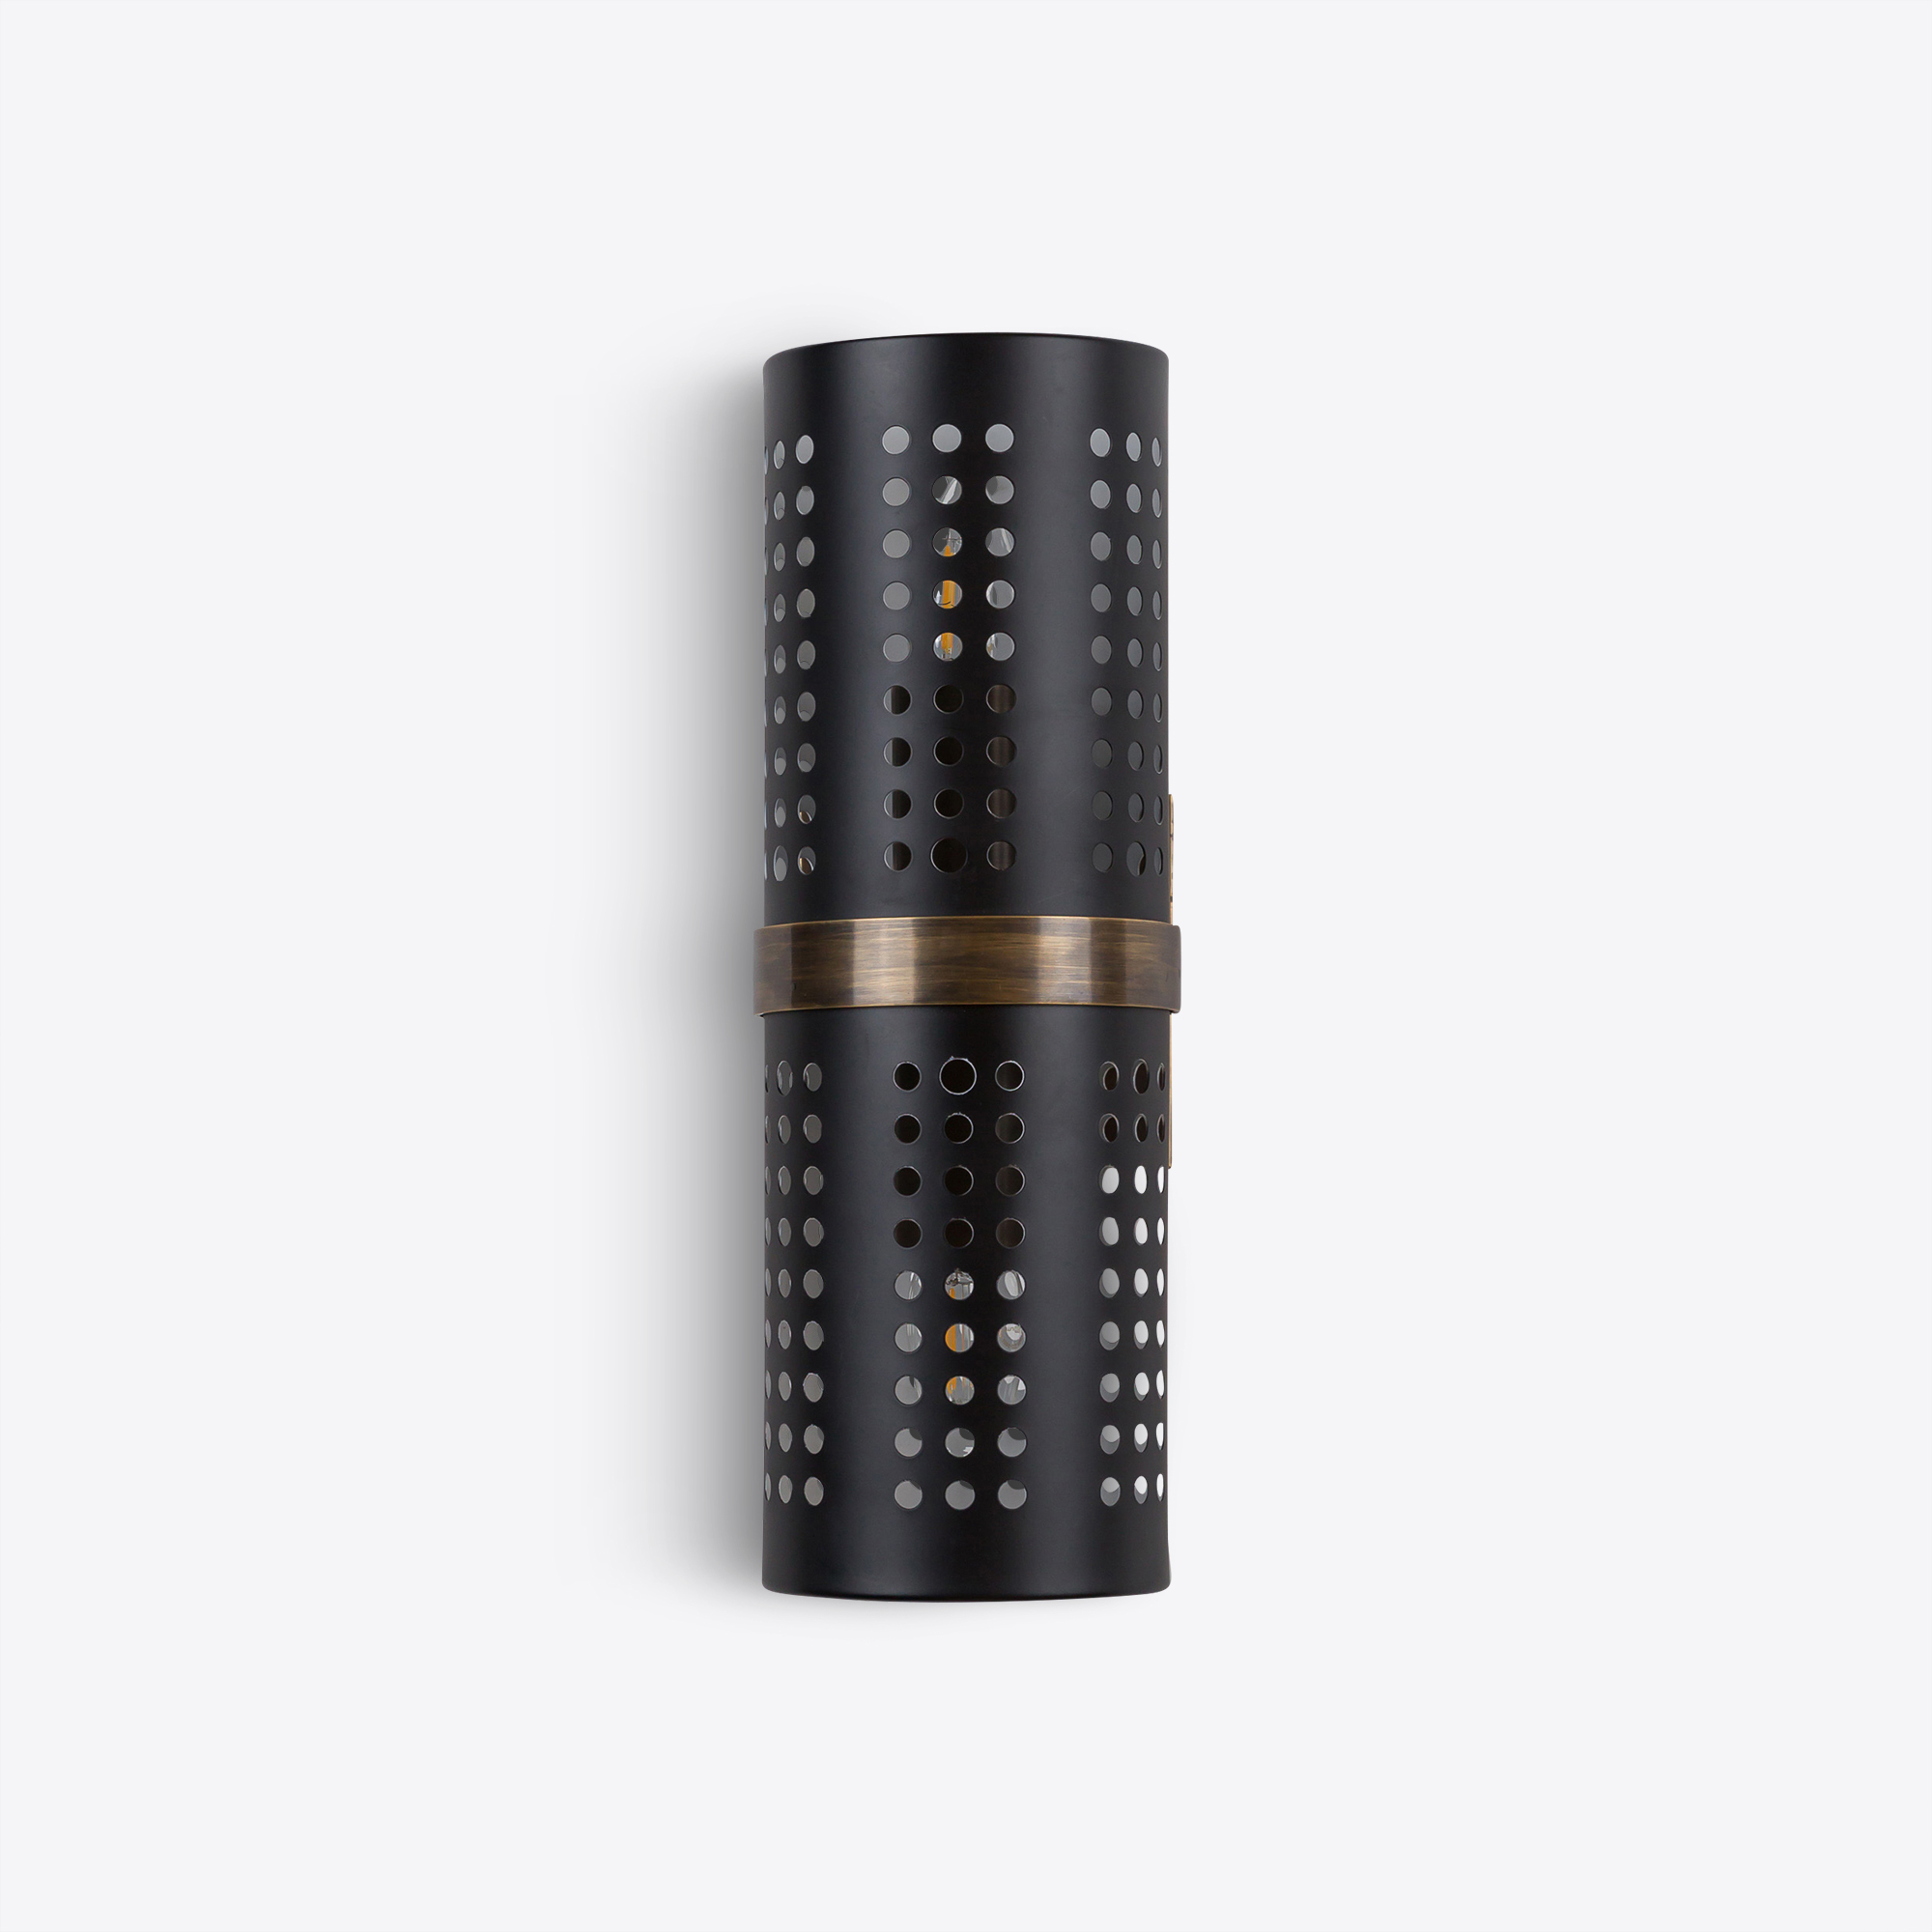 Breuer brass tubular cylindrical wall light in mid-century brutalist style with perforations